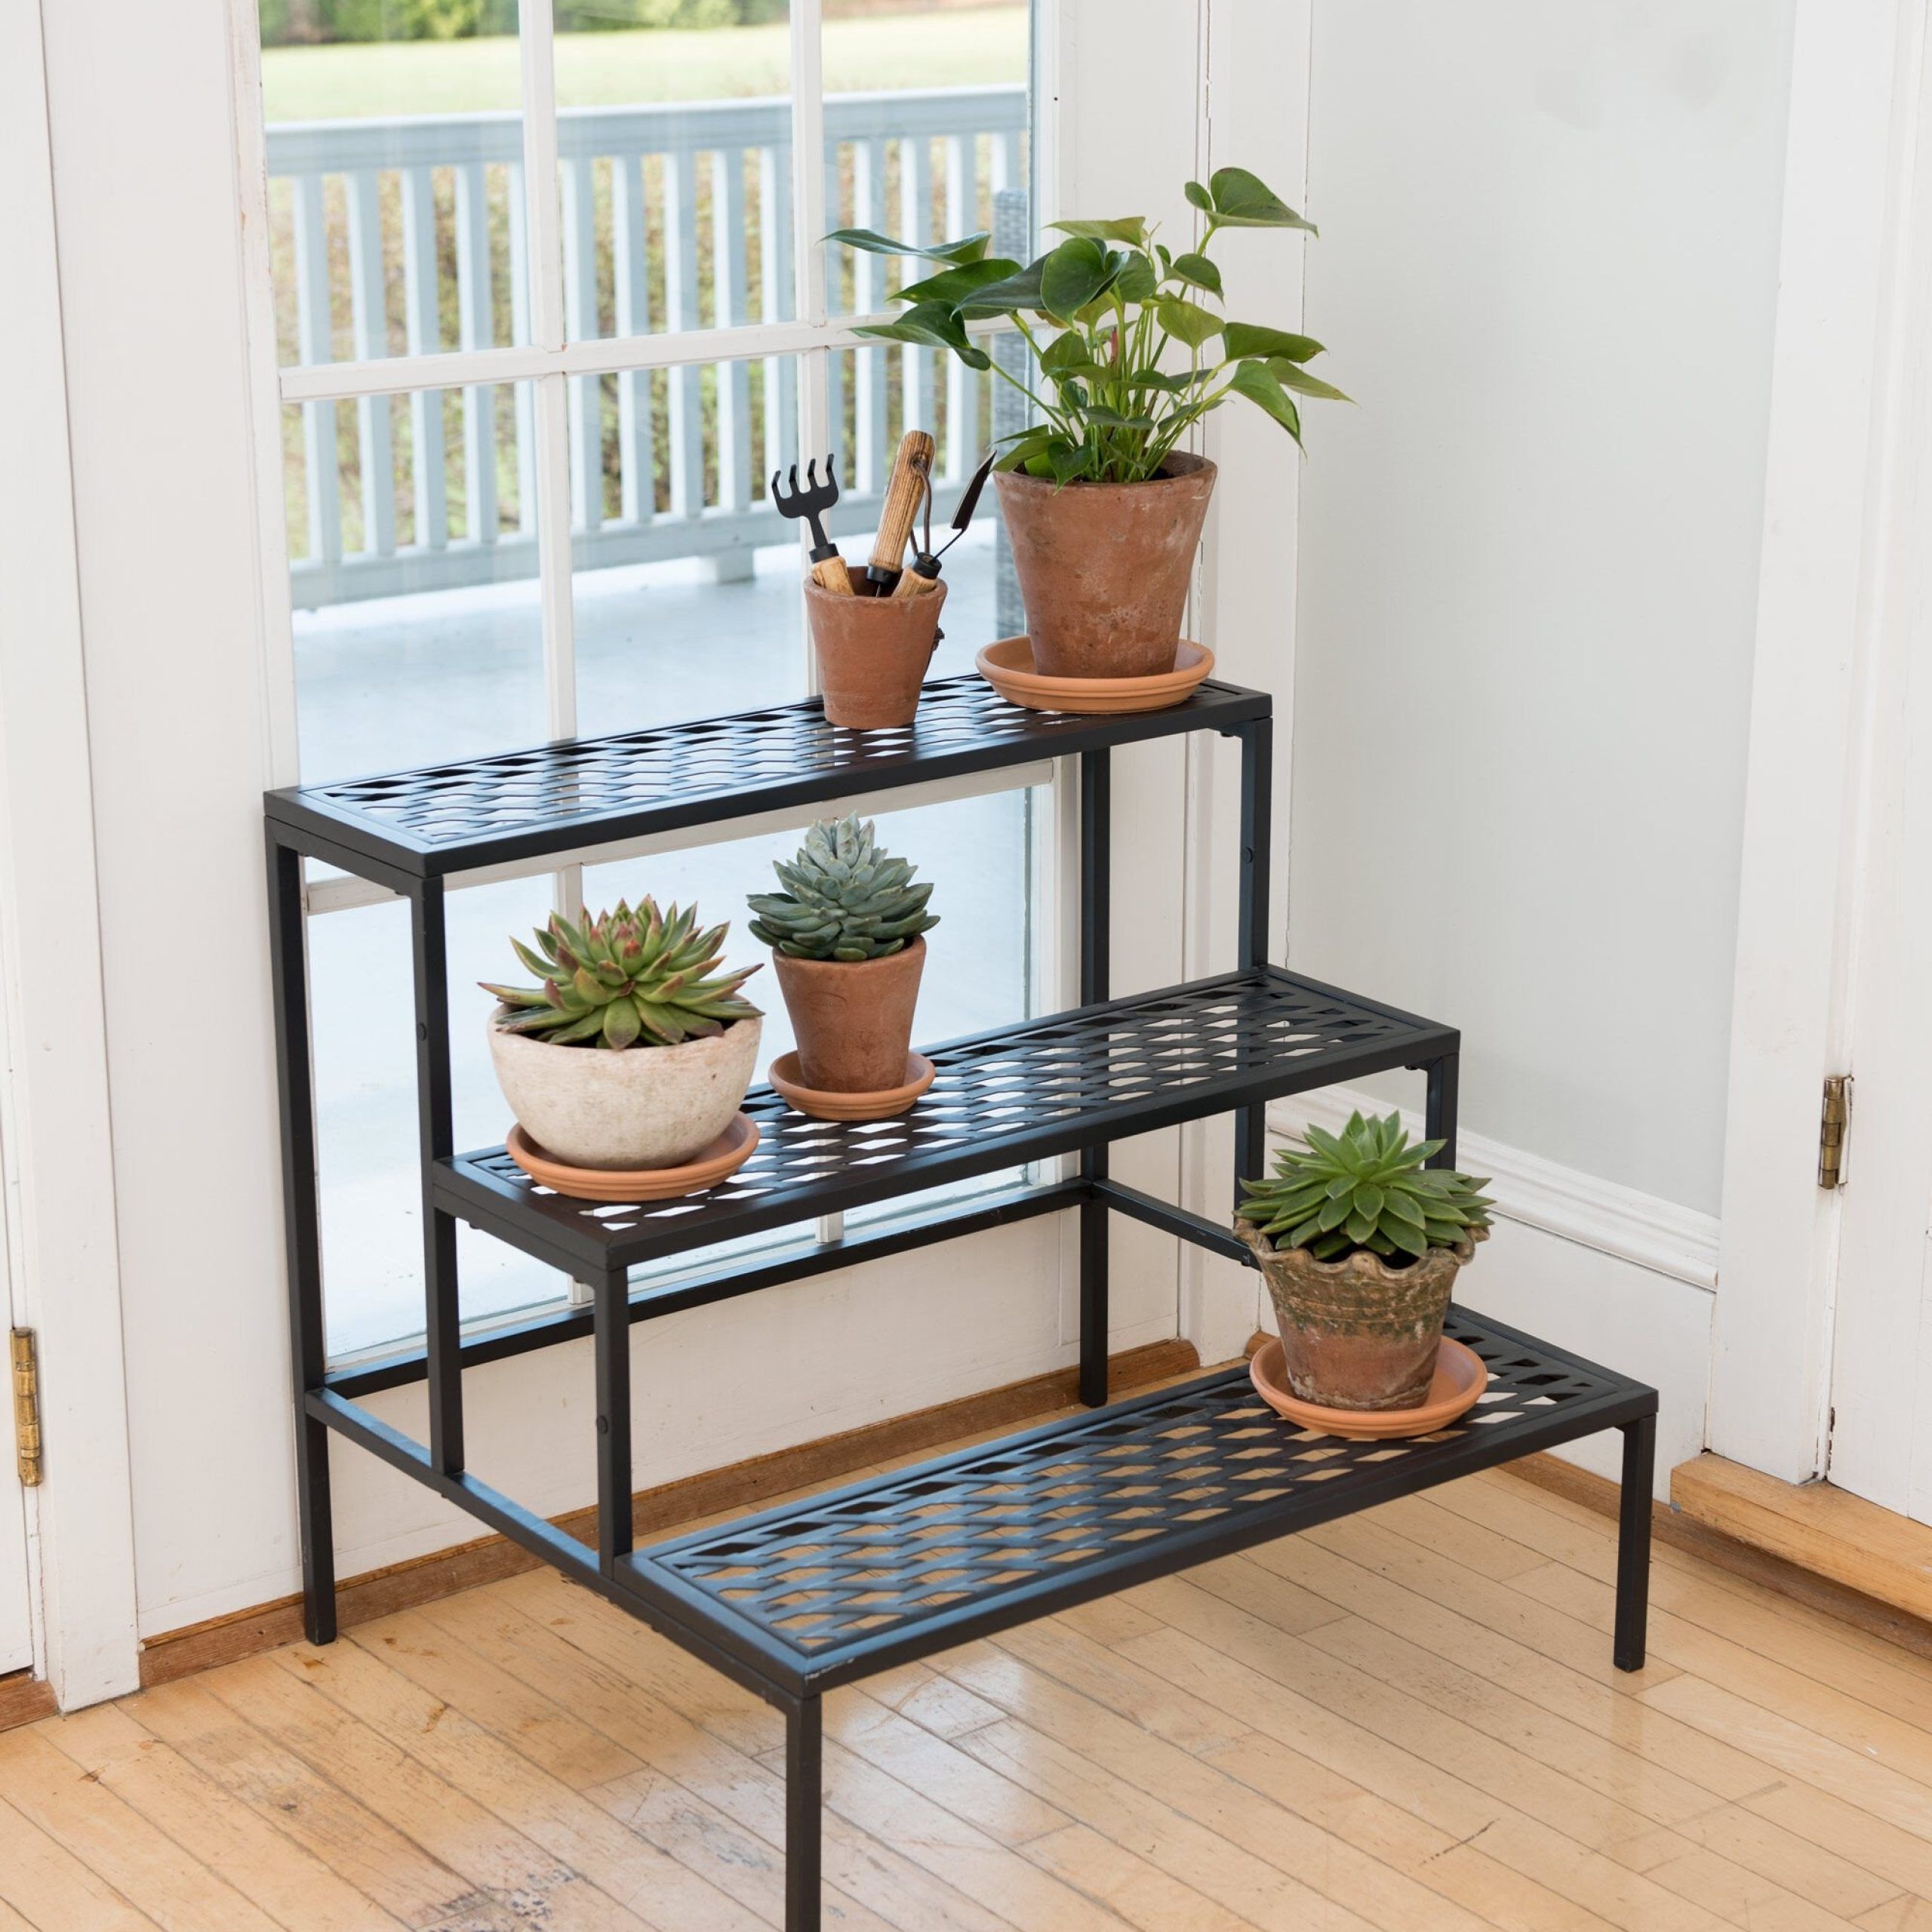 Lattice Multi Tiered Plant Stand – Black | Gardener'S Supply In Three Tiered Plant Stands (View 4 of 15)